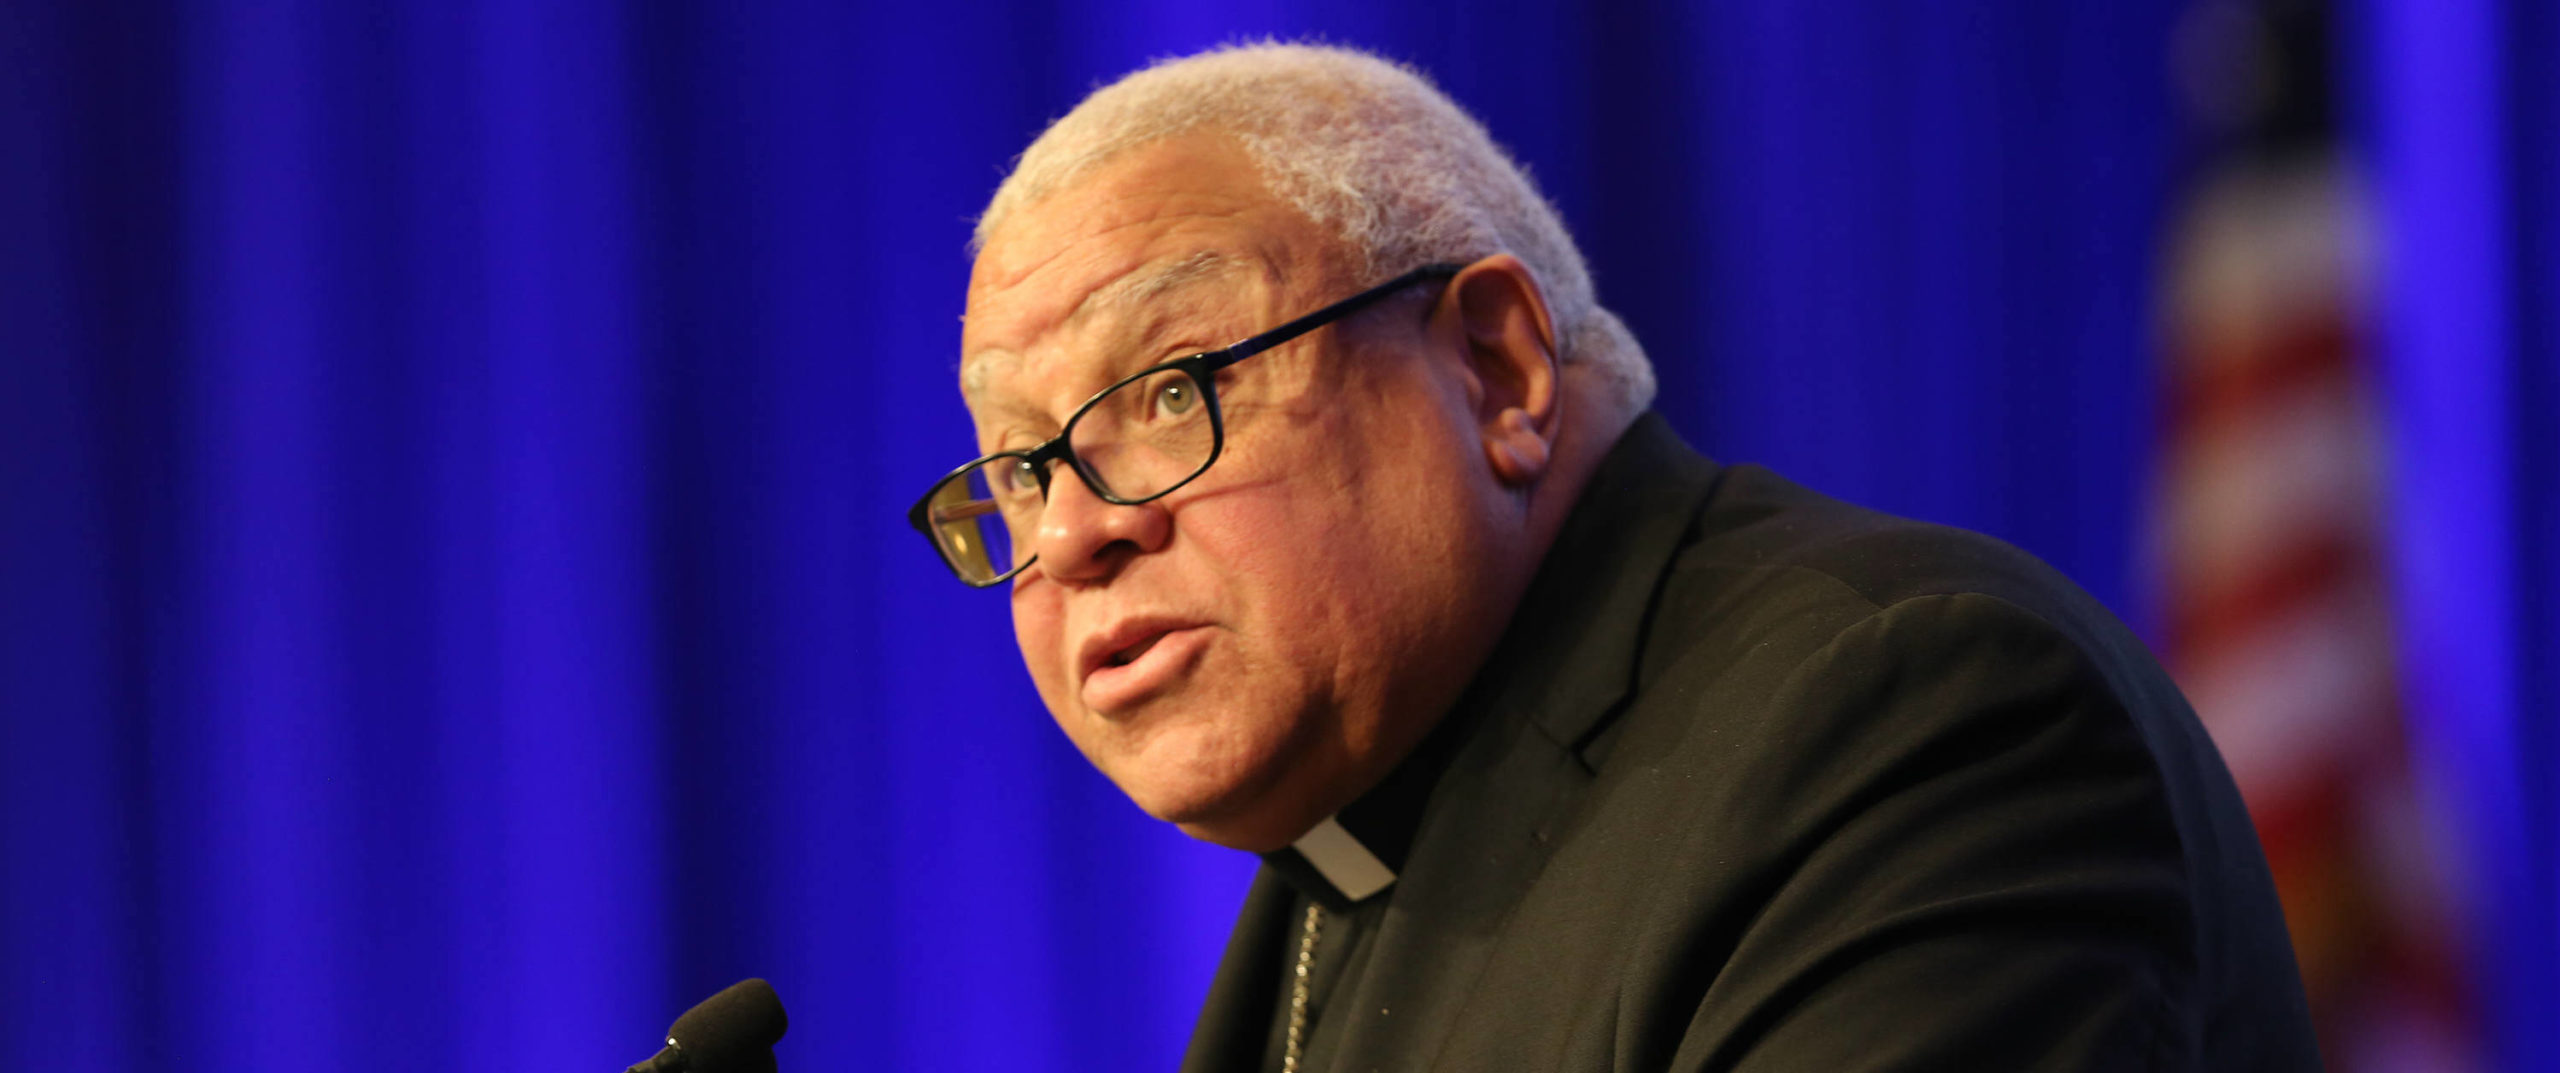 Catholic Church sometimes has been part of racism problem, says Bishop Murry